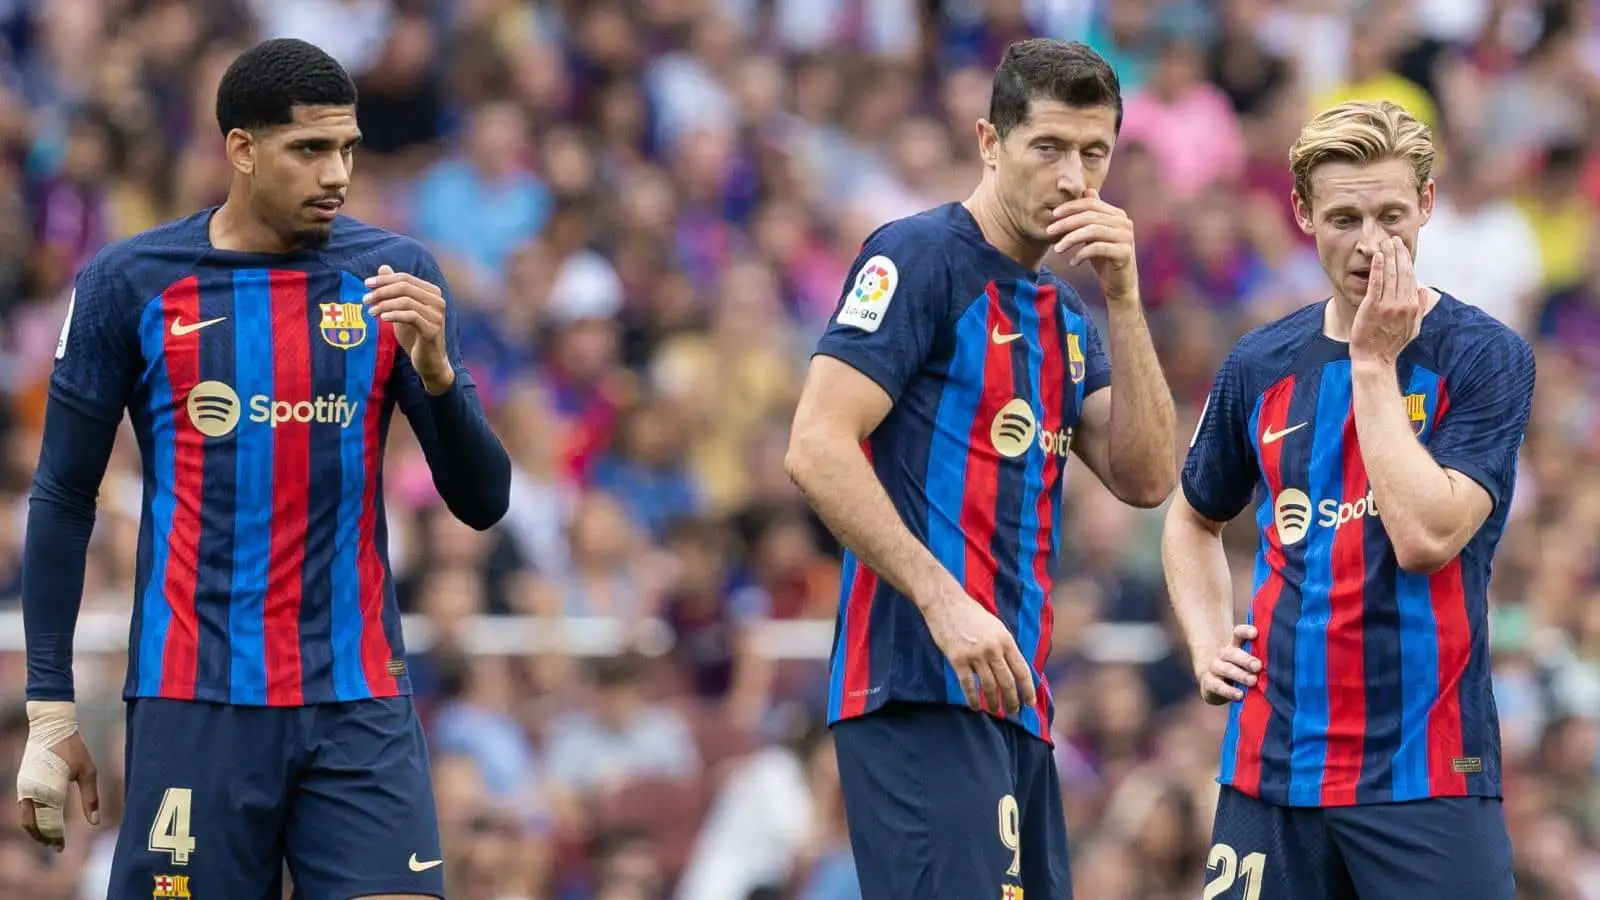 Euro Paper Talk: Ten Hag ‘obsession’ sees Man Utd move for Barcelona duo as part of spectacular €500m spree; Leeds star Gnonto in talks with two shock clubs